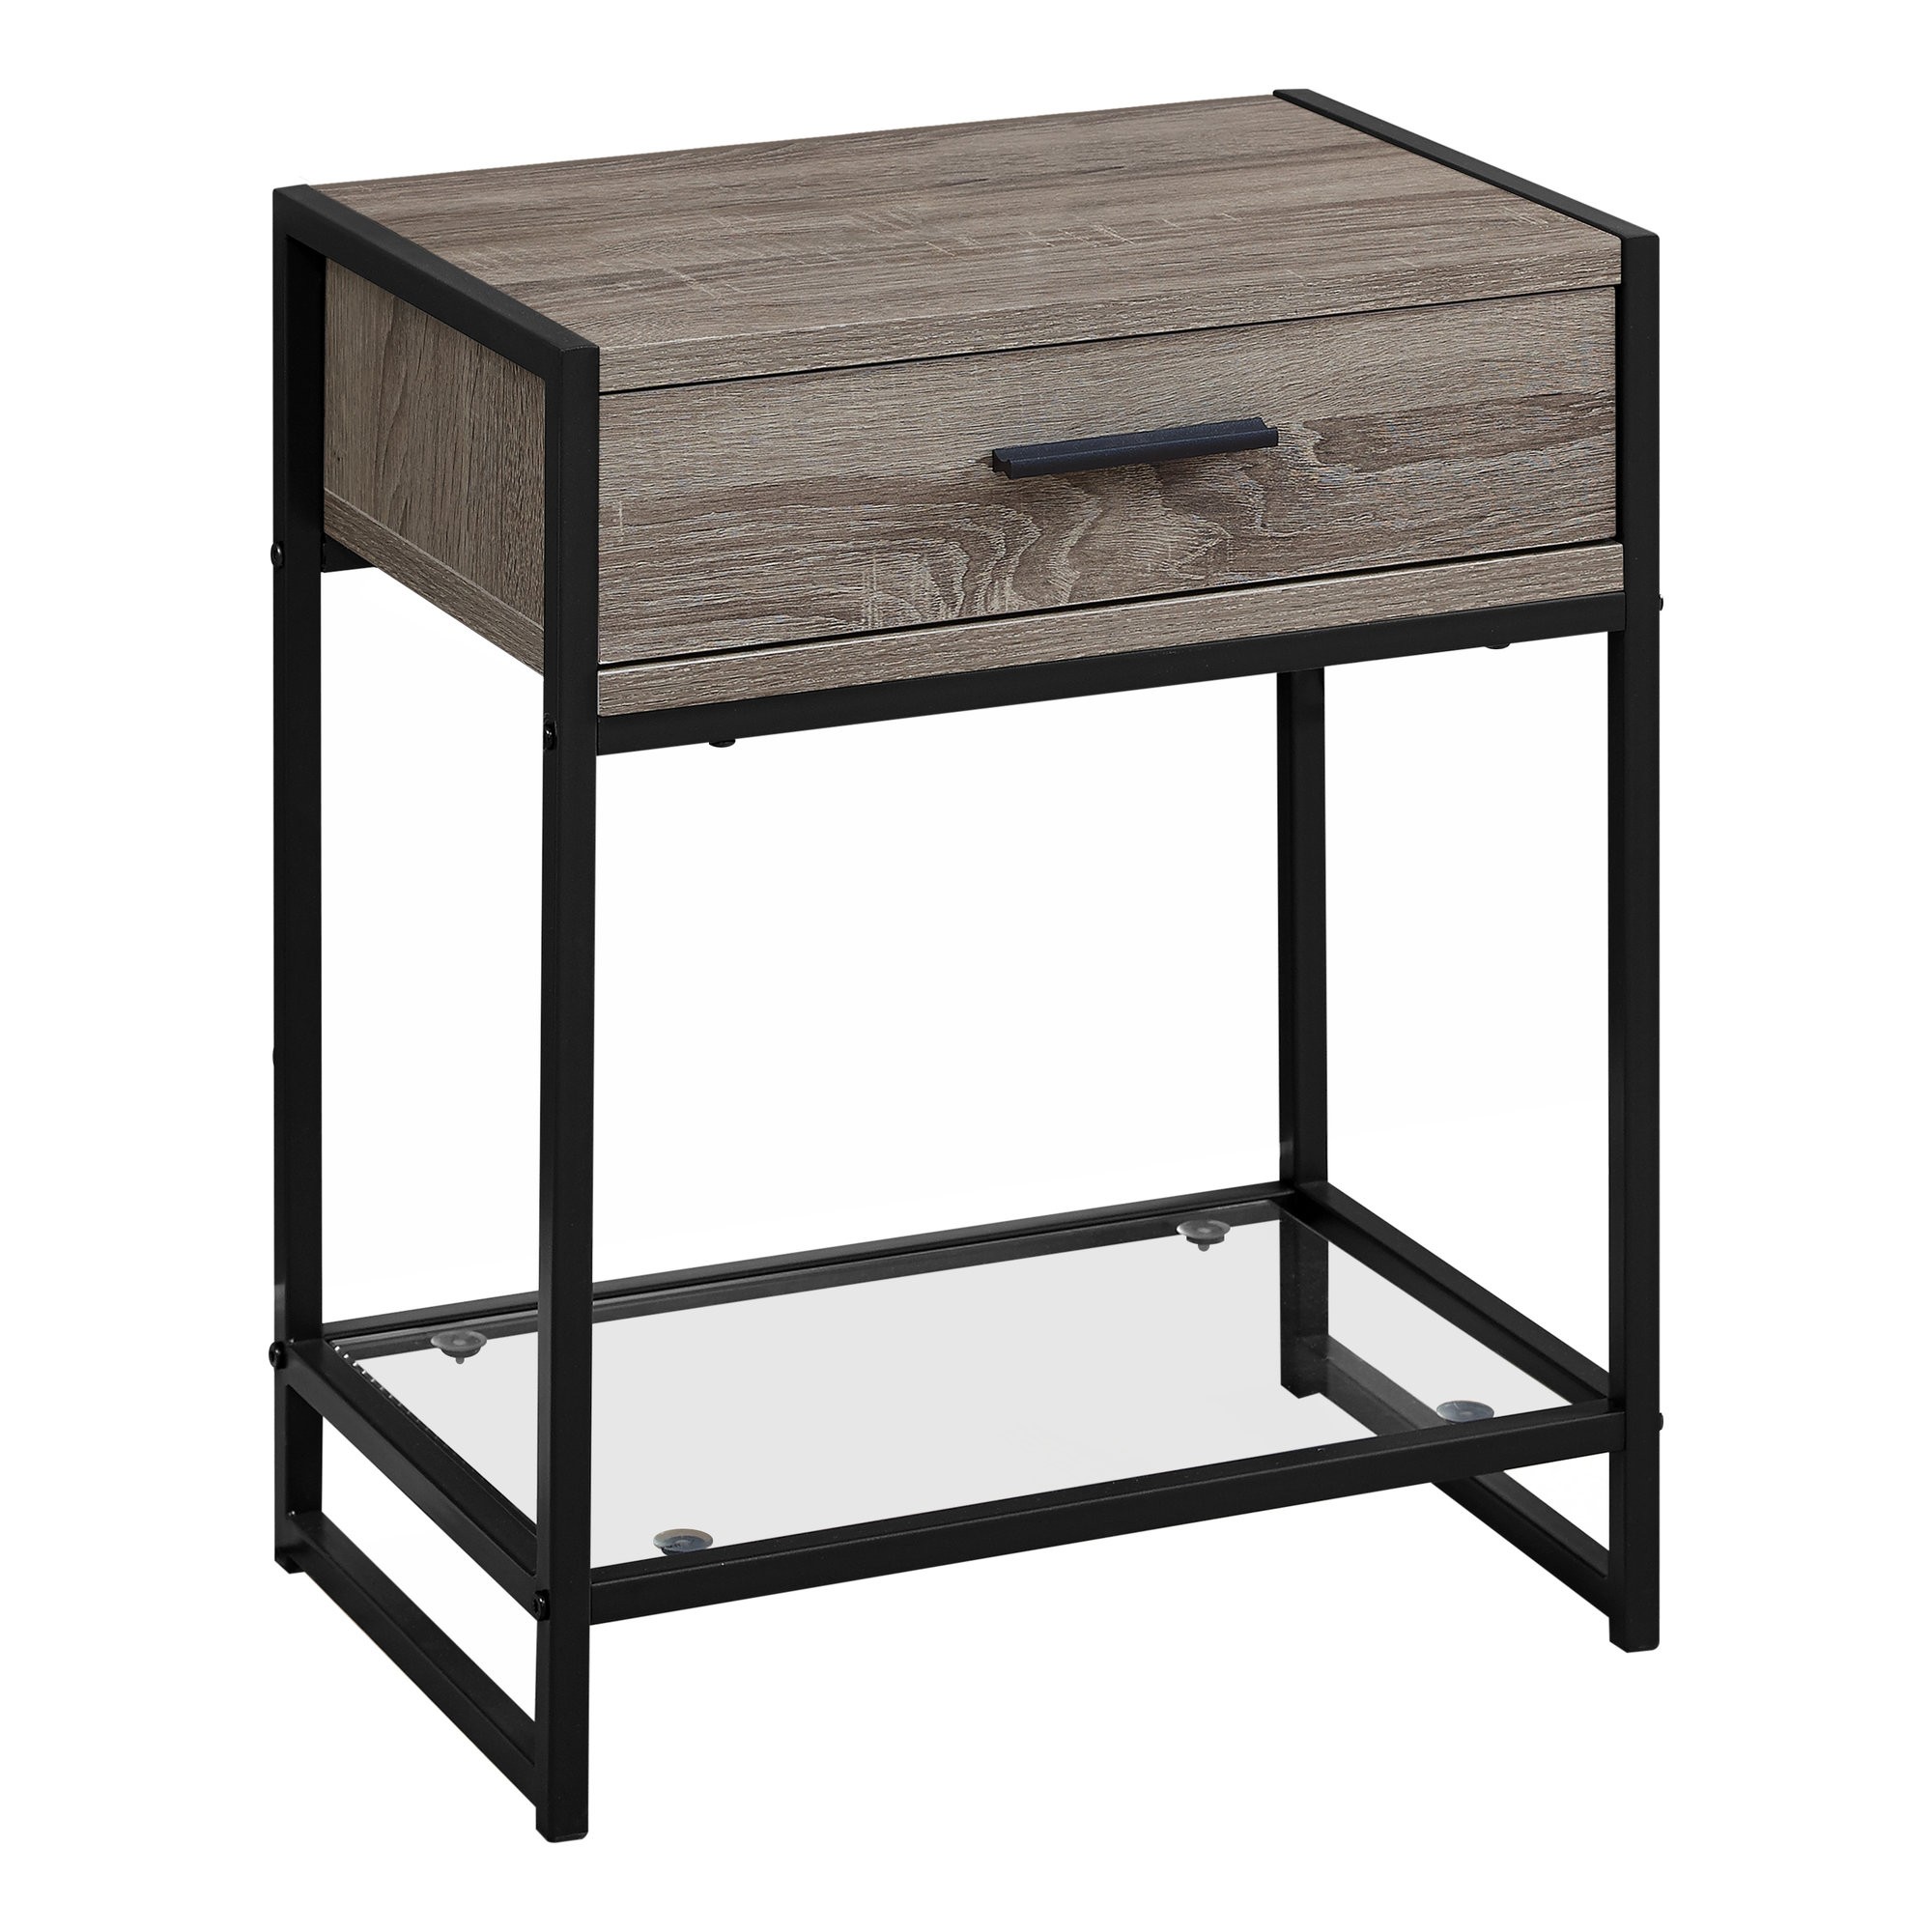 ACCENT TABLE - 22"H / DARK TAUPE / BLACK / TEMPERED GLASS